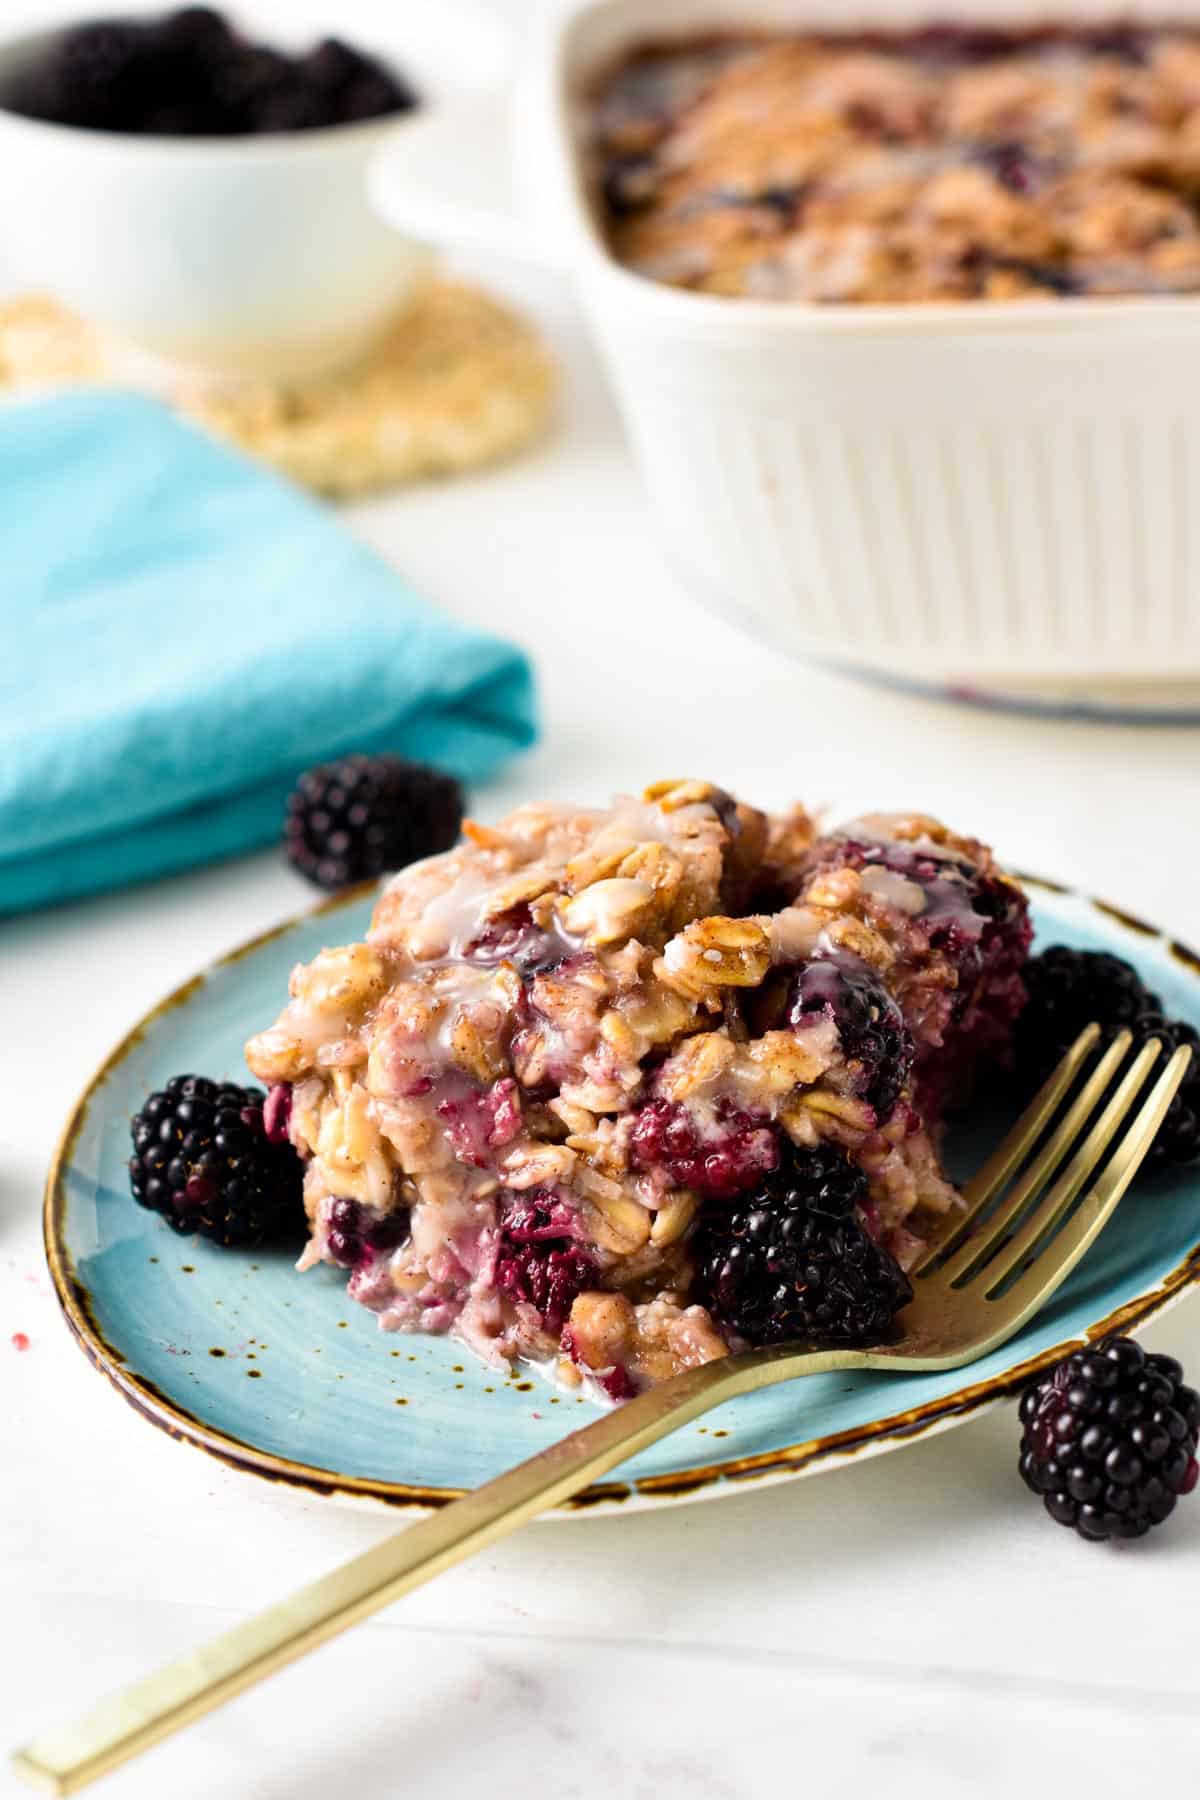 This Blackberry Oatmeal Bake is an easy, healthy one-pan oatmeal breakfast filled with juicy blackberries. It's perfect to feed healthy breakfast to all the family on busy morning and starts the day full of energy.